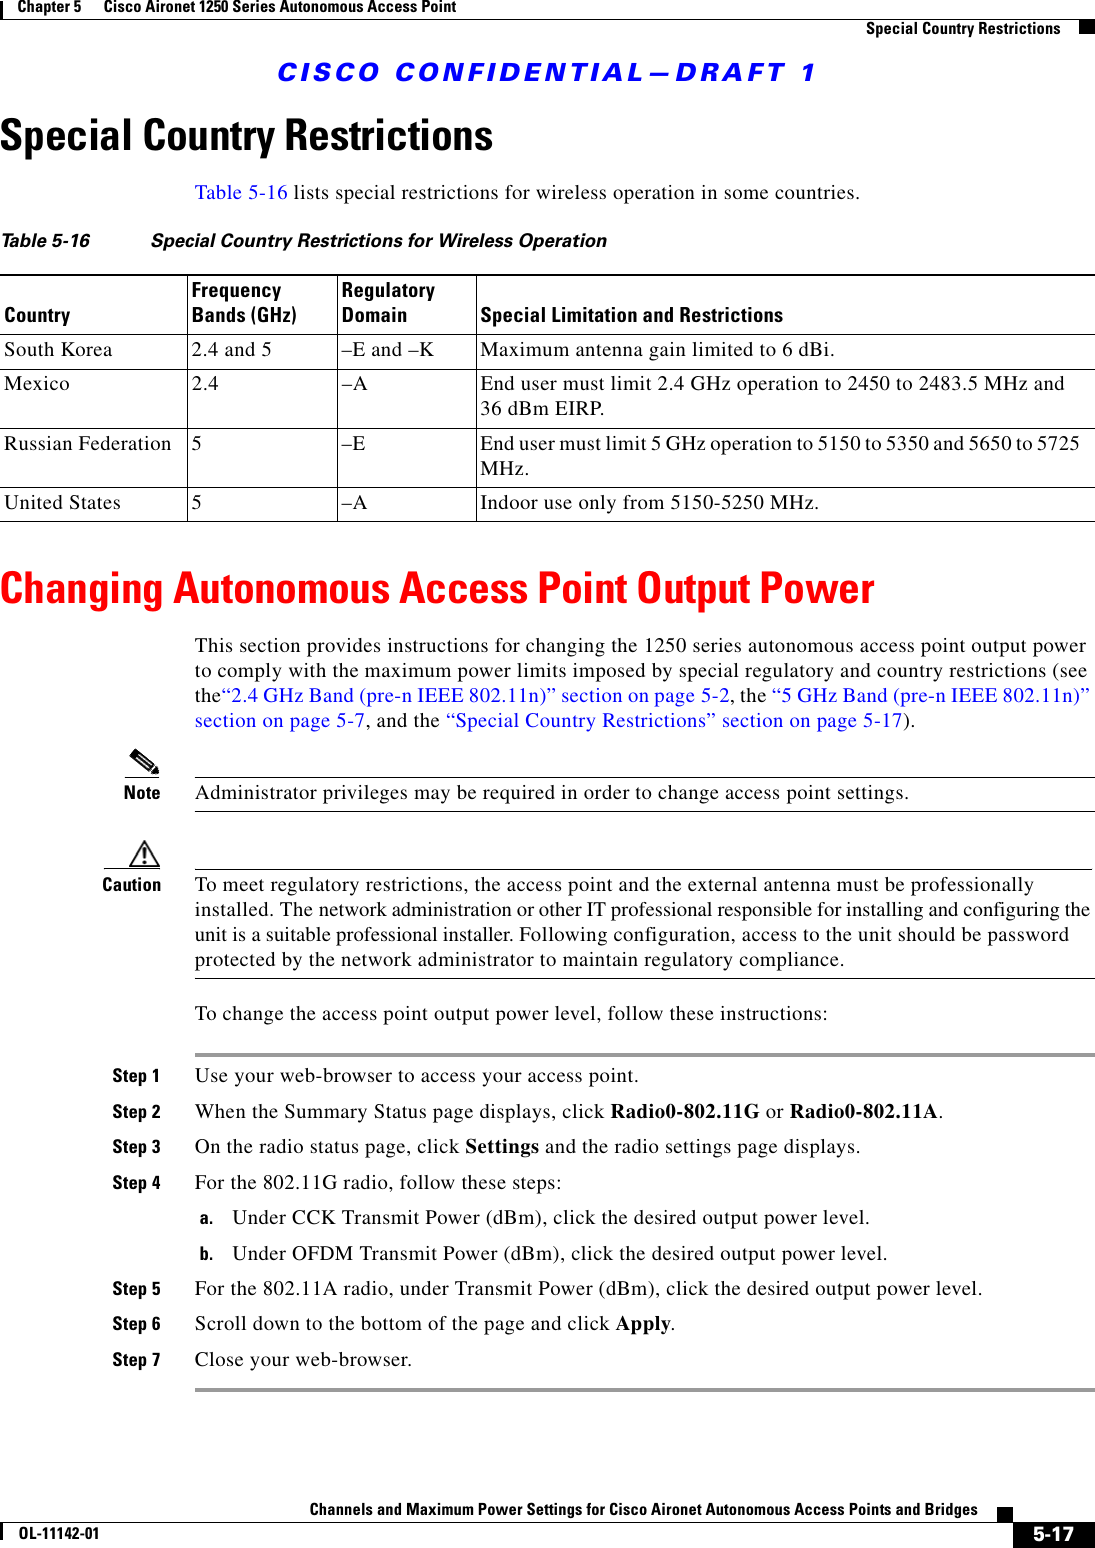 CISCO CONFIDENTIAL—DRAFT 15-17Channels and Maximum Power Settings for Cisco Aironet Autonomous Access Points and BridgesOL-11142-01Chapter 5      Cisco Aironet 1250 Series Autonomous Access Point    Special Country RestrictionsSpecial Country RestrictionsTable 5-16 lists special restrictions for wireless operation in some countries. Changing Autonomous Access Point Output PowerThis section provides instructions for changing the 1250 series autonomous access point output power to comply with the maximum power limits imposed by special regulatory and country restrictions (see the“2.4 GHz Band (pre-n IEEE 802.11n)” section on page 5-2, the “5 GHz Band (pre-n IEEE 802.11n)” section on page 5-7, and the “Special Country Restrictions” section on page 5-17). Note Administrator privileges may be required in order to change access point settings.Caution To meet regulatory restrictions, the access point and the external antenna must be professionally installed. The network administration or other IT professional responsible for installing and configuring the unit is a suitable professional installer. Following configuration, access to the unit should be password protected by the network administrator to maintain regulatory compliance.To change the access point output power level, follow these instructions:Step 1 Use your web-browser to access your access point.Step 2 When the Summary Status page displays, click Radio0-802.11G or Radio0-802.11A.Step 3 On the radio status page, click Settings and the radio settings page displays.Step 4 For the 802.11G radio, follow these steps:a. Under CCK Transmit Power (dBm), click the desired output power level.b. Under OFDM Transmit Power (dBm), click the desired output power level.Step 5 For the 802.11A radio, under Transmit Power (dBm), click the desired output power level.Step 6 Scroll down to the bottom of the page and click Apply. Step 7 Close your web-browser.Table 5-16 Special Country Restrictions for Wireless OperationCountryFrequency Bands (GHz)Regulatory Domain Special Limitation and RestrictionsSouth Korea 2.4 and 5  –E and –K Maximum antenna gain limited to 6 dBi.Mexico 2.4  –A End user must limit 2.4 GHz operation to 2450 to 2483.5 MHz and 36 dBm EIRP.Russian Federation 5 –E End user must limit 5 GHz operation to 5150 to 5350 and 5650 to 5725 MHz.United States 5  –A  Indoor use only from 5150-5250 MHz.